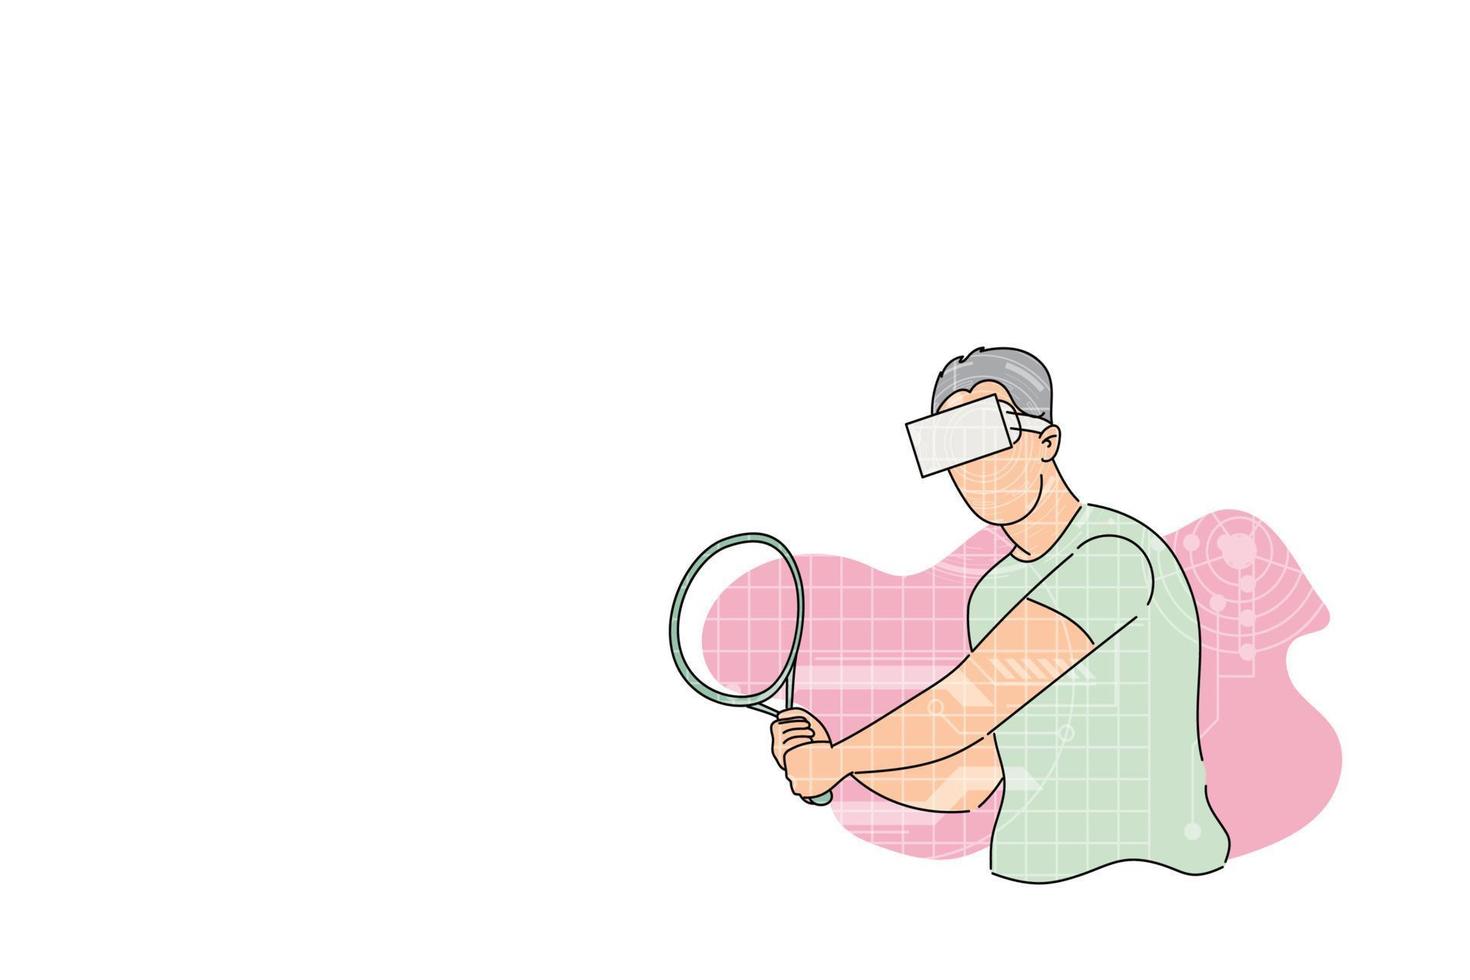 Man playing tenis in virtual reality game. Vector illustration design